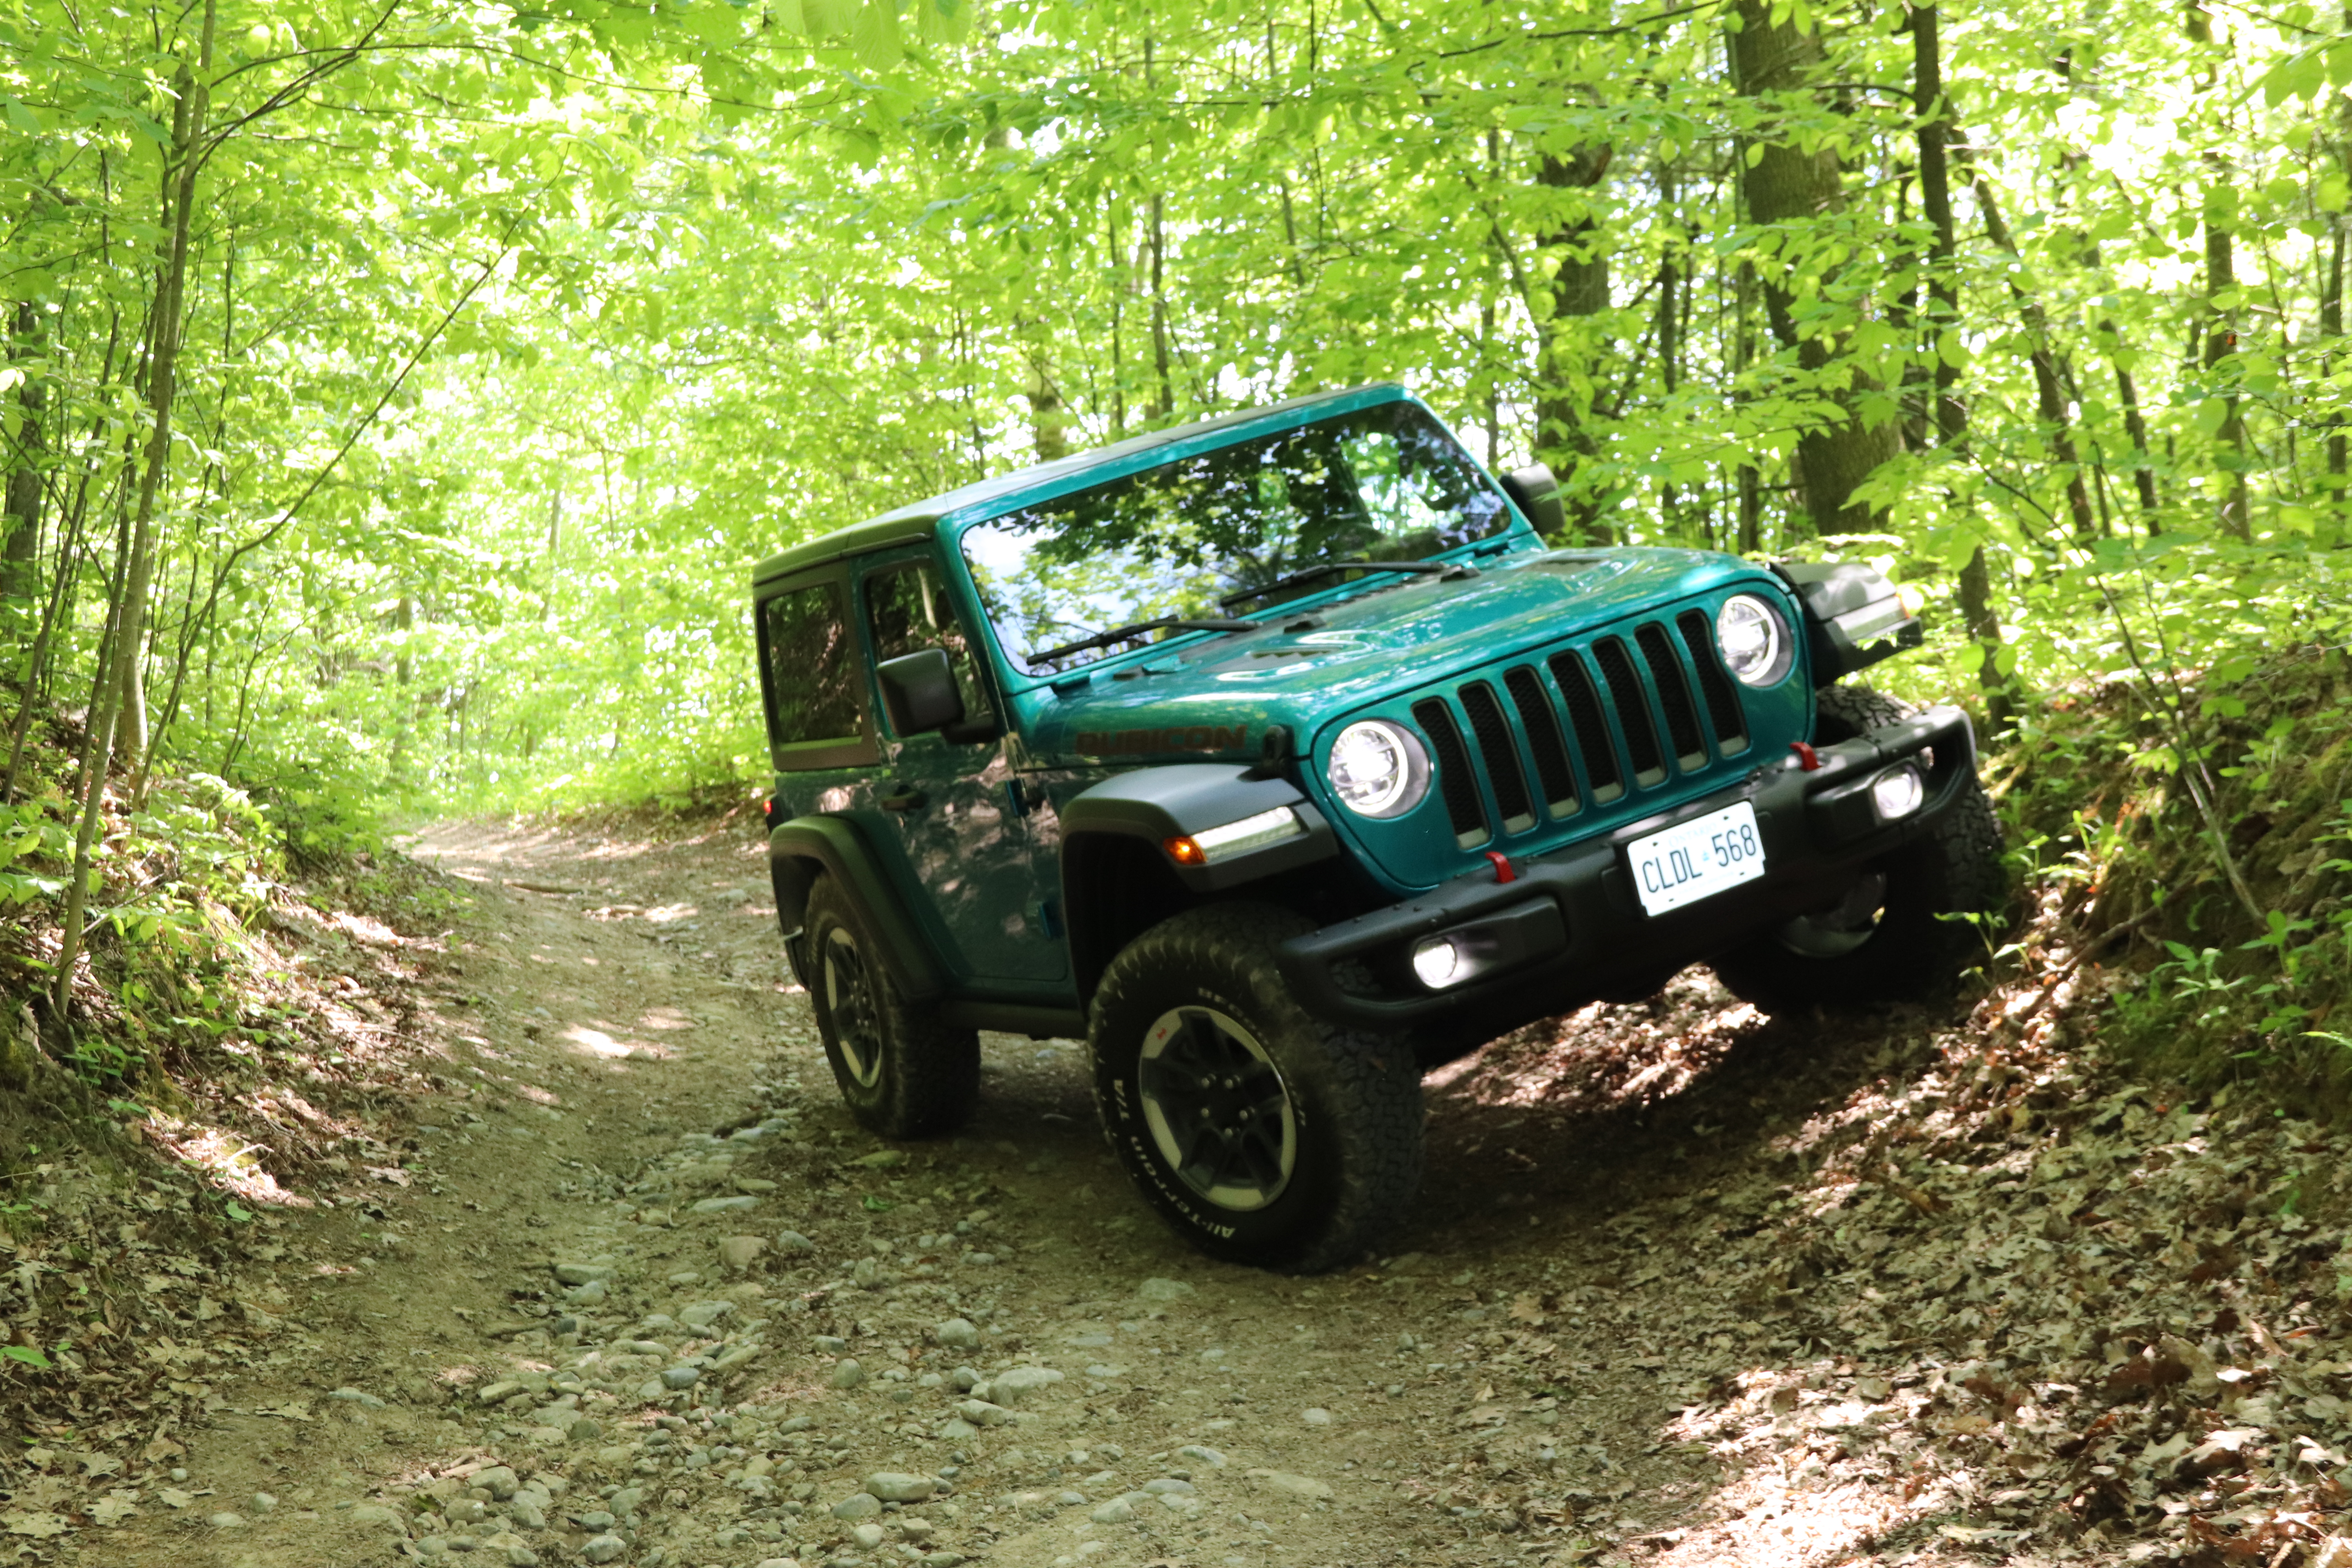 Review: The Jeep Wrangler Rubicon may be hopelessly impractical